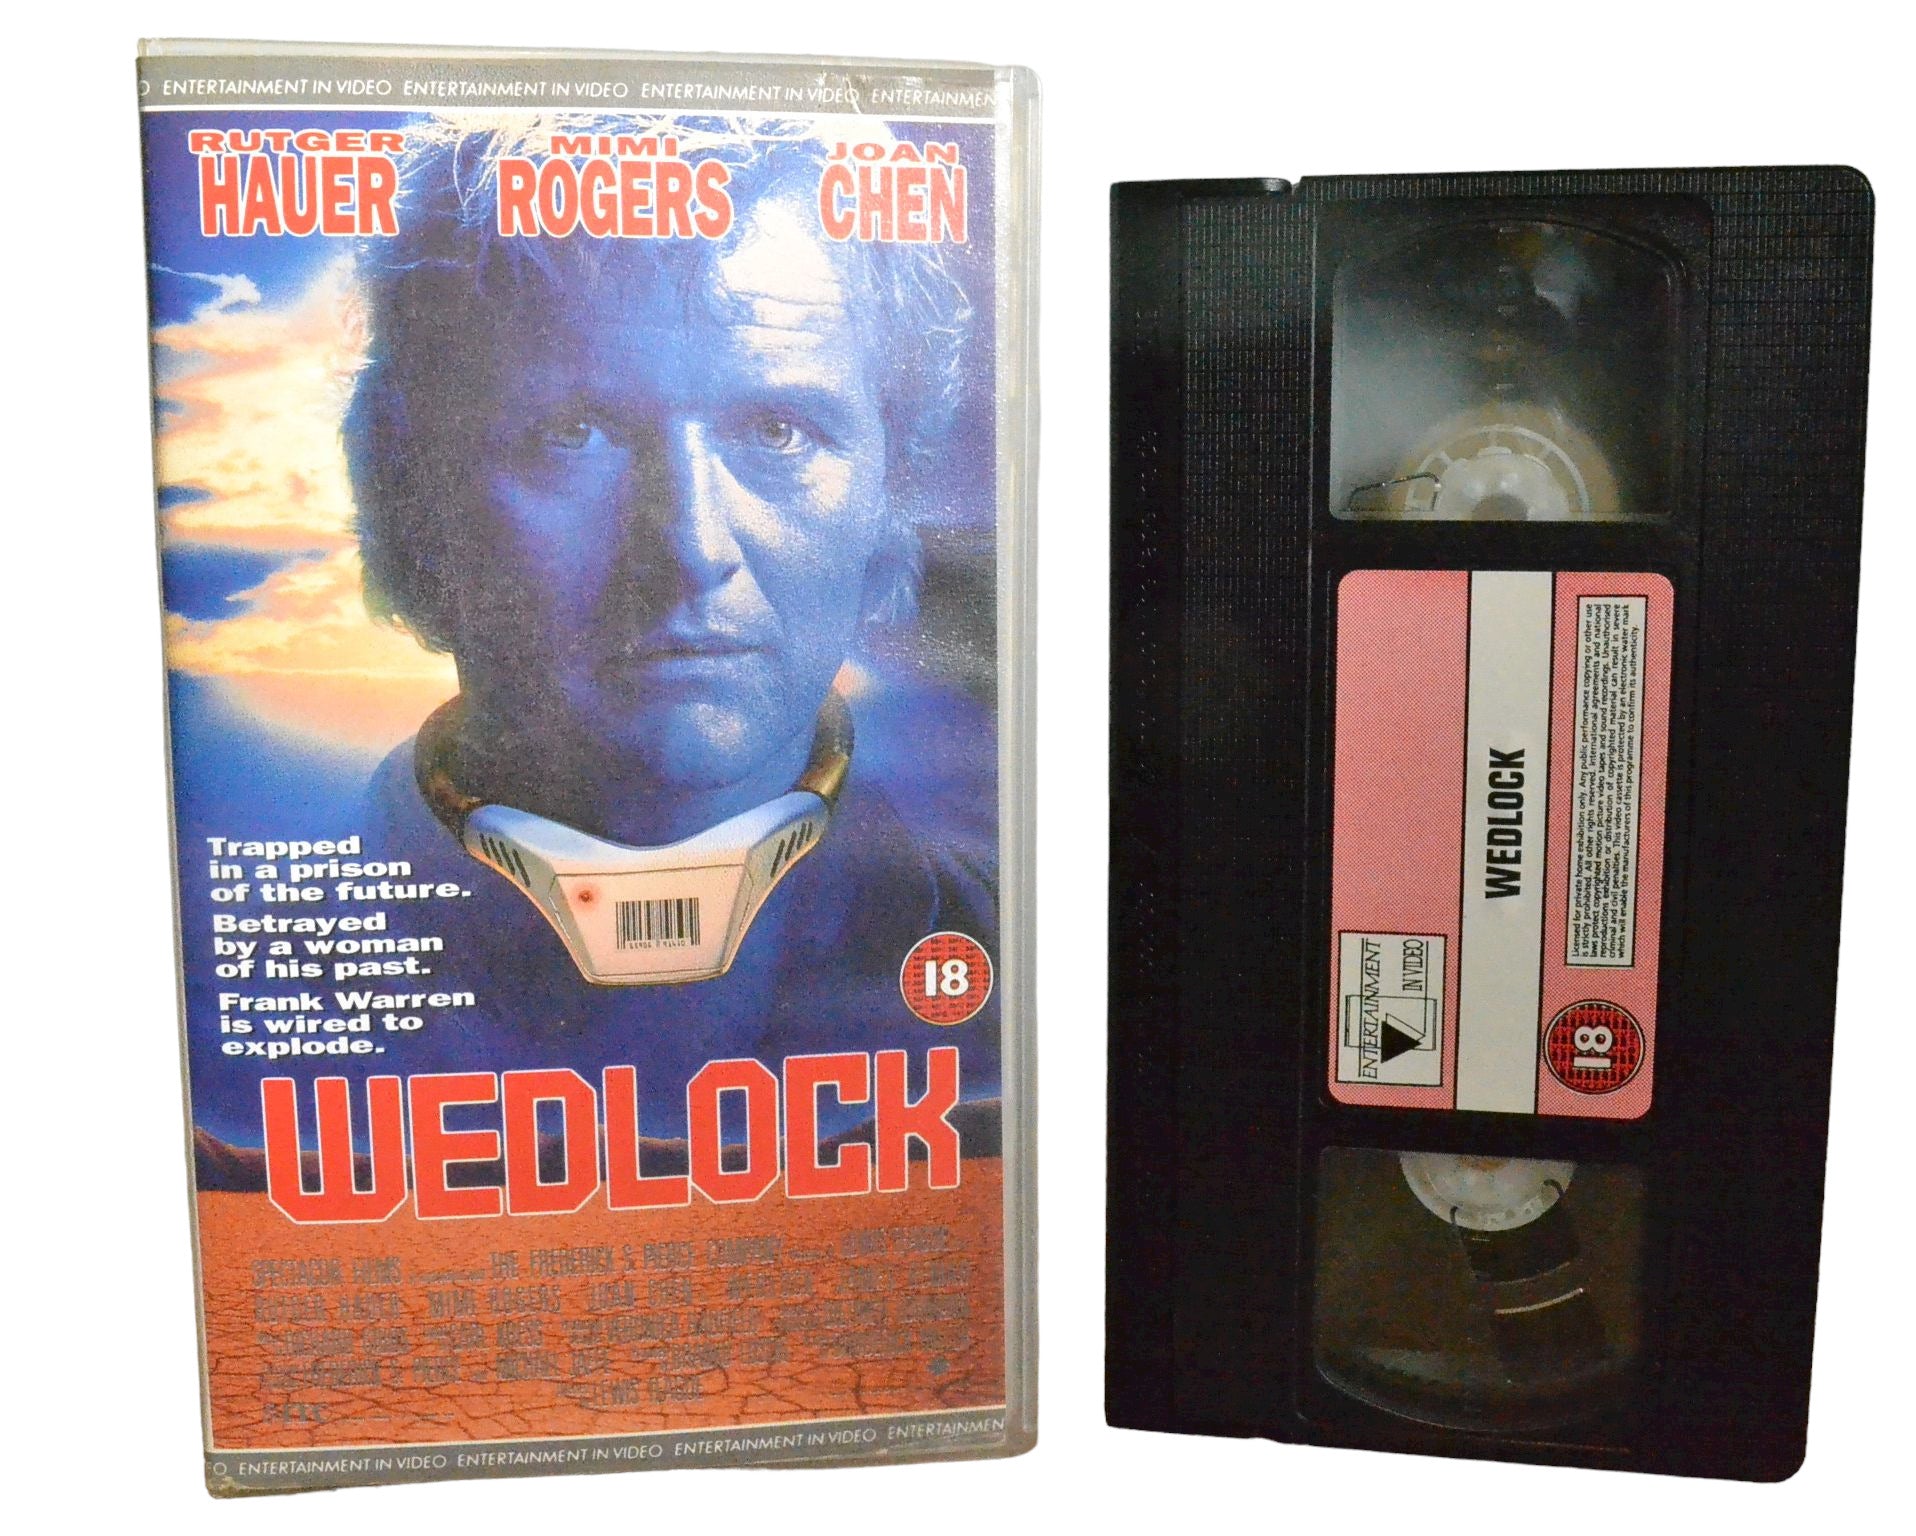 Wedlock - Rutger Hauer - Entertainment in Video - Action - Pal - VHS-